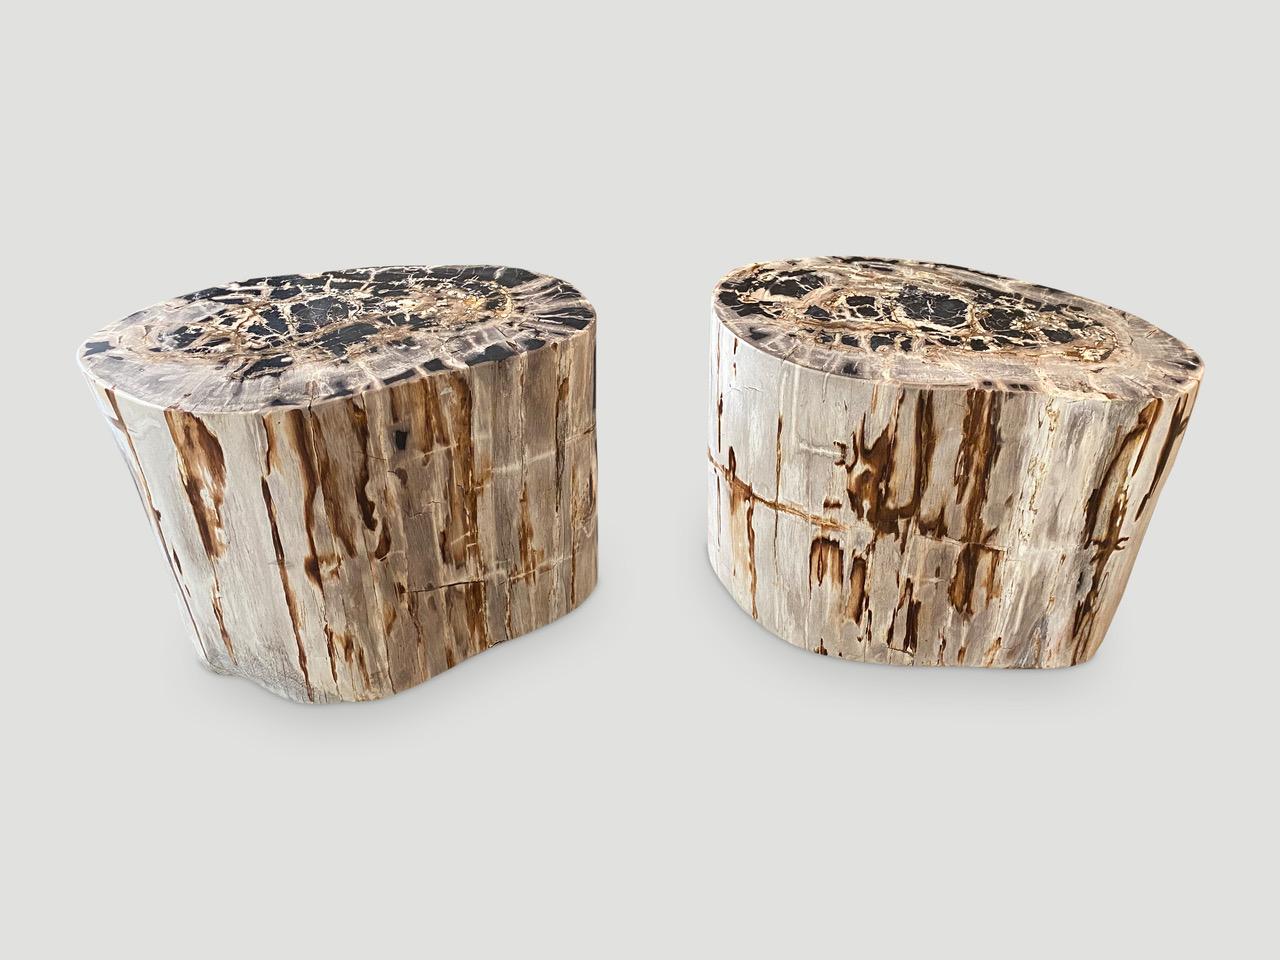 Impressive pair of beautiful high quality petrified wood side tables. These were cut from the same log. It’s fascinating how Mother Nature produces these exquisite 40 million year old petrified teak logs with such contrasting colors and natural